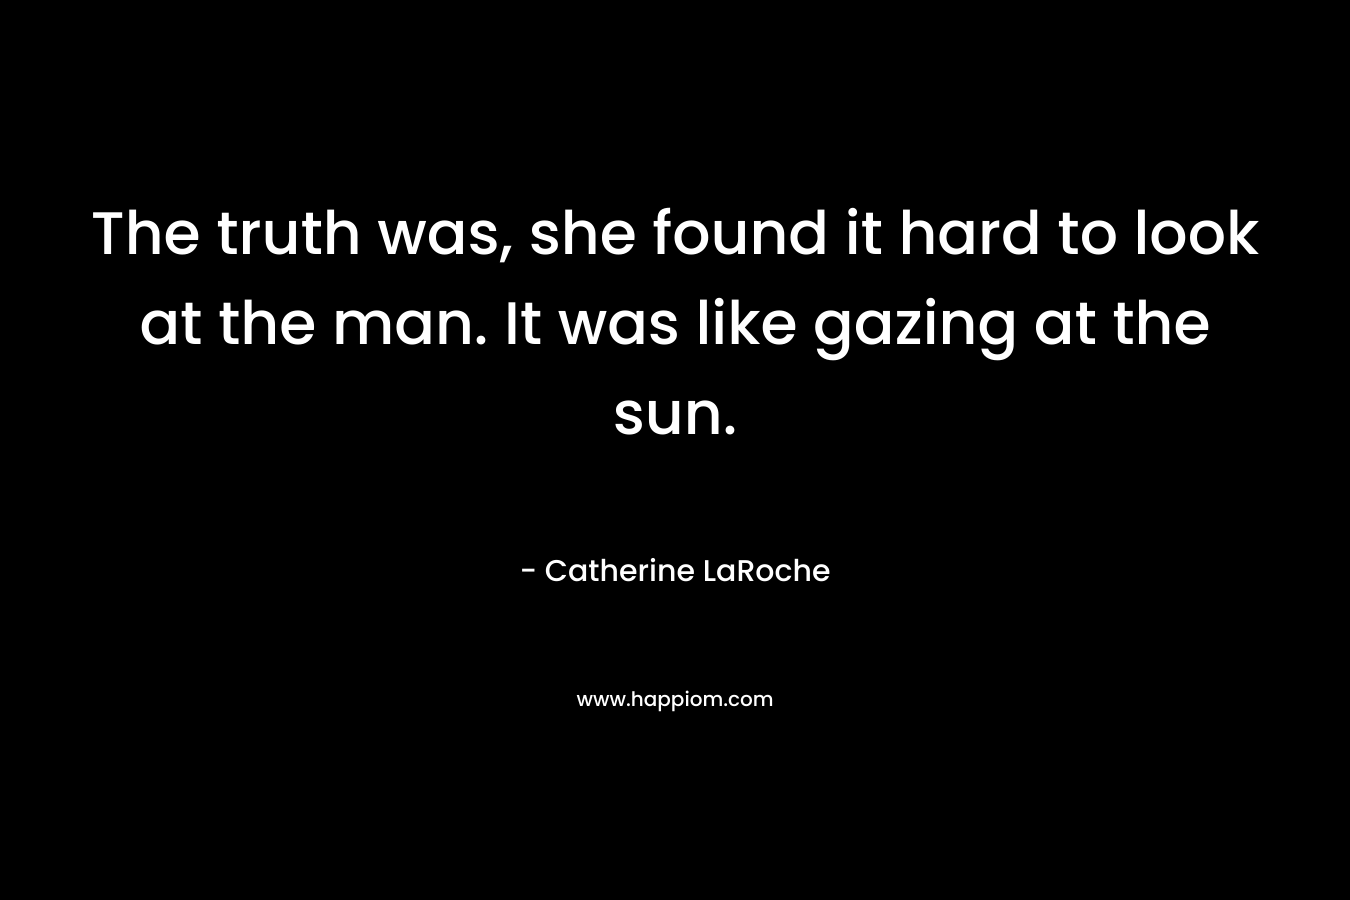 The truth was, she found it hard to look at the man. It was like gazing at the sun.